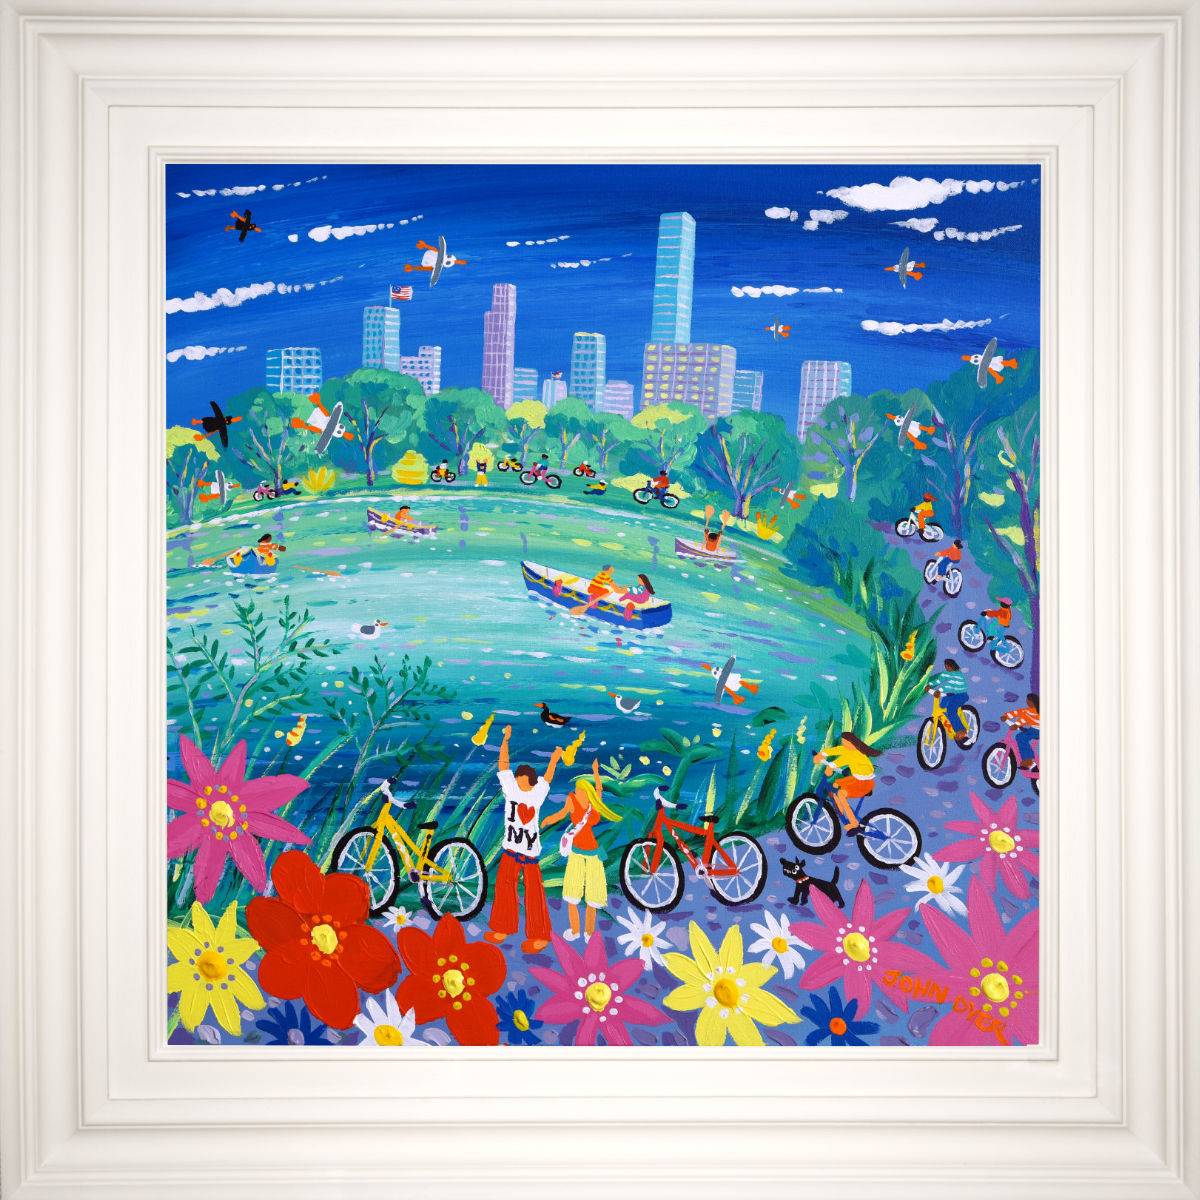 'Cycling around Central Park, New York', 24x24 inches acrylic on canvas. Paintings of America by British Artist John Dyer. American Art Gallery